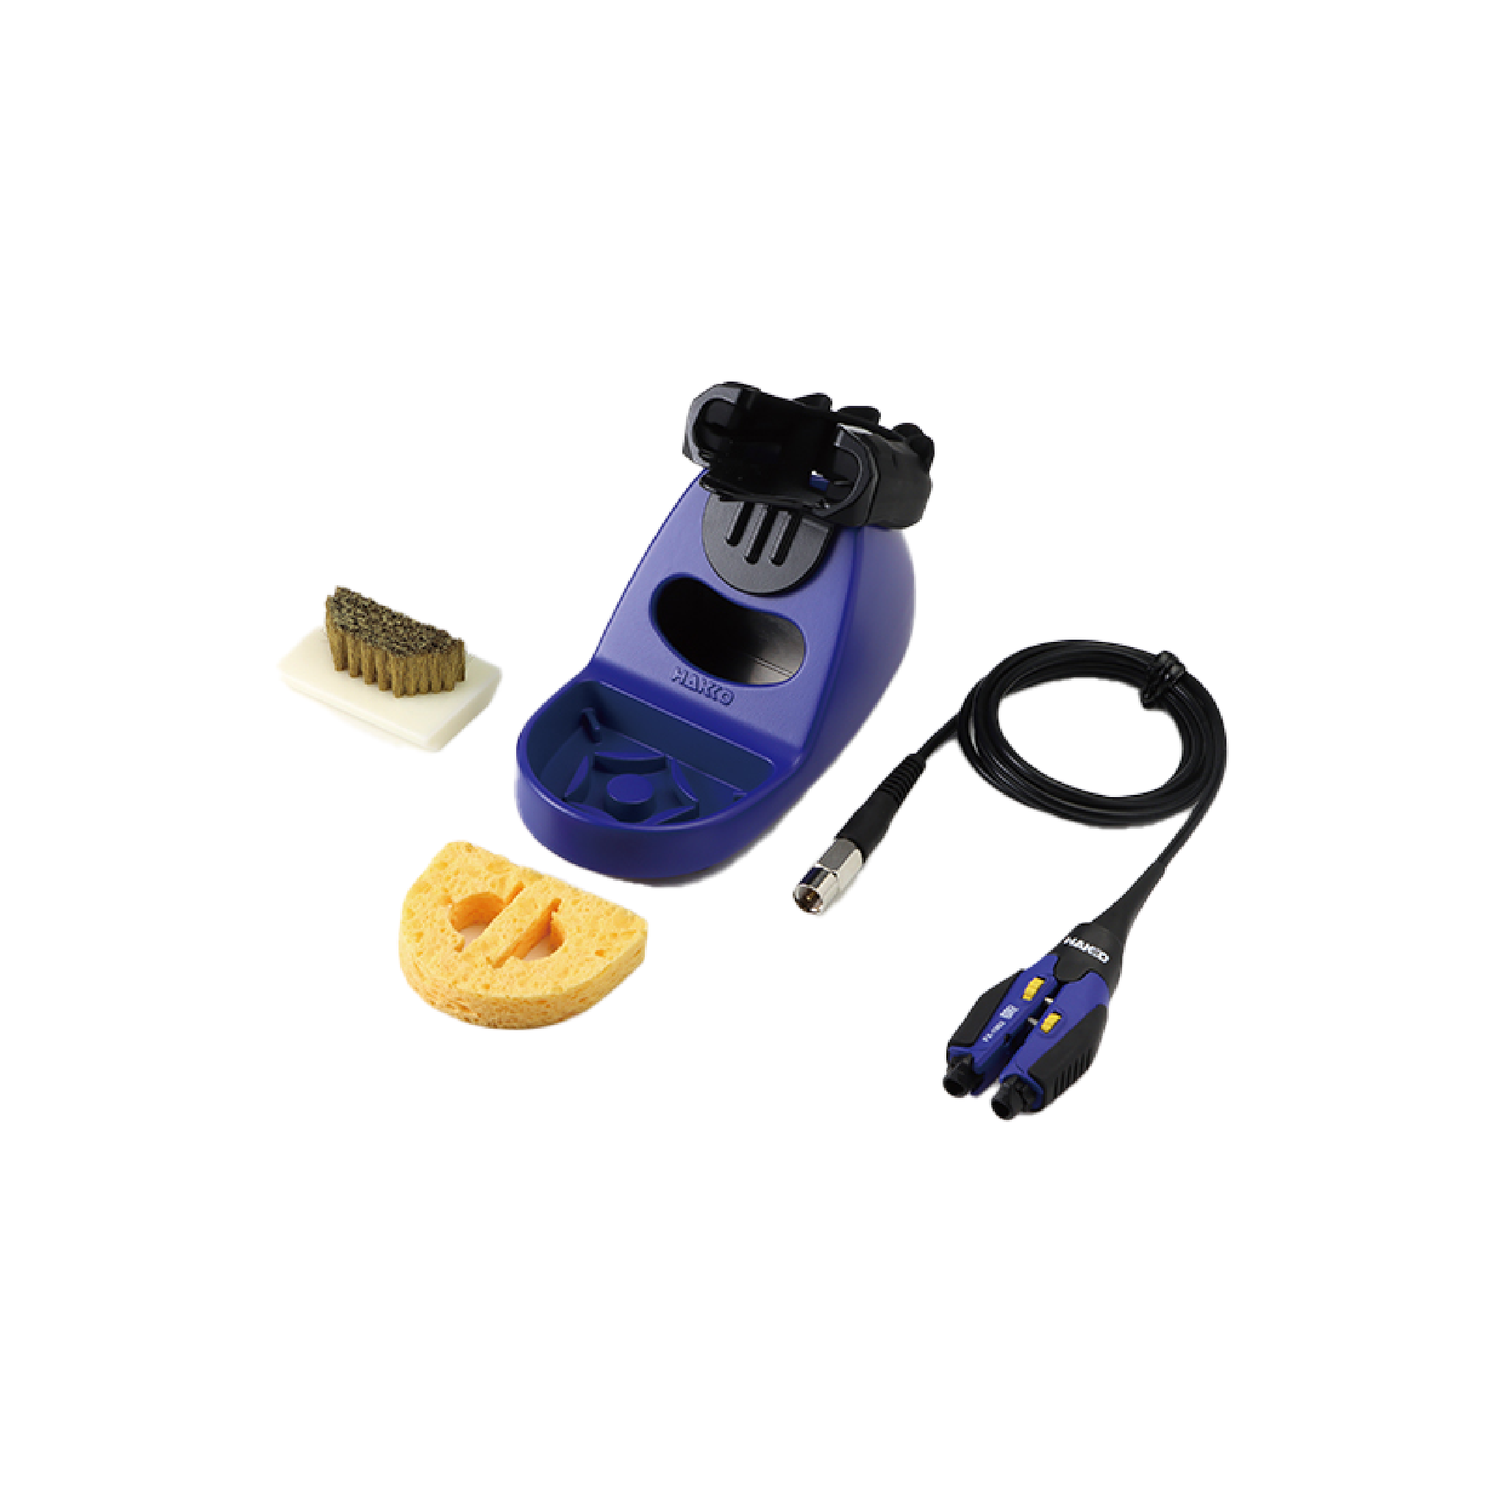 Hakko FX1003 IH micro hot tweezers conversion kit with handpiece, iron holder sponge and copper wire cleaning option.